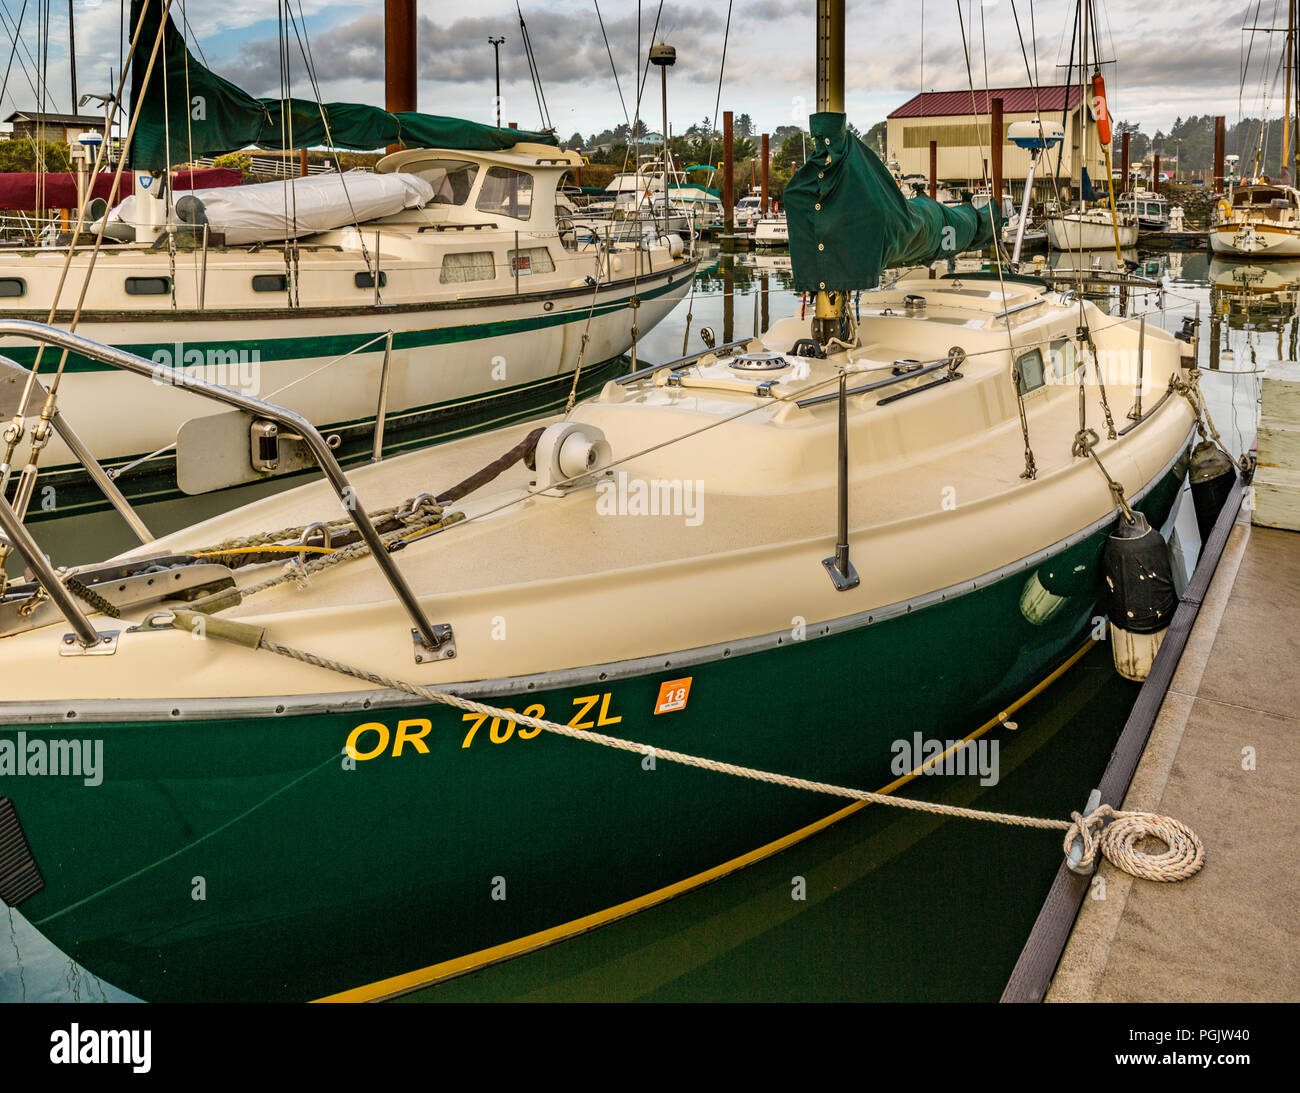 Salty green sailboat is ready to go! Stock Photo